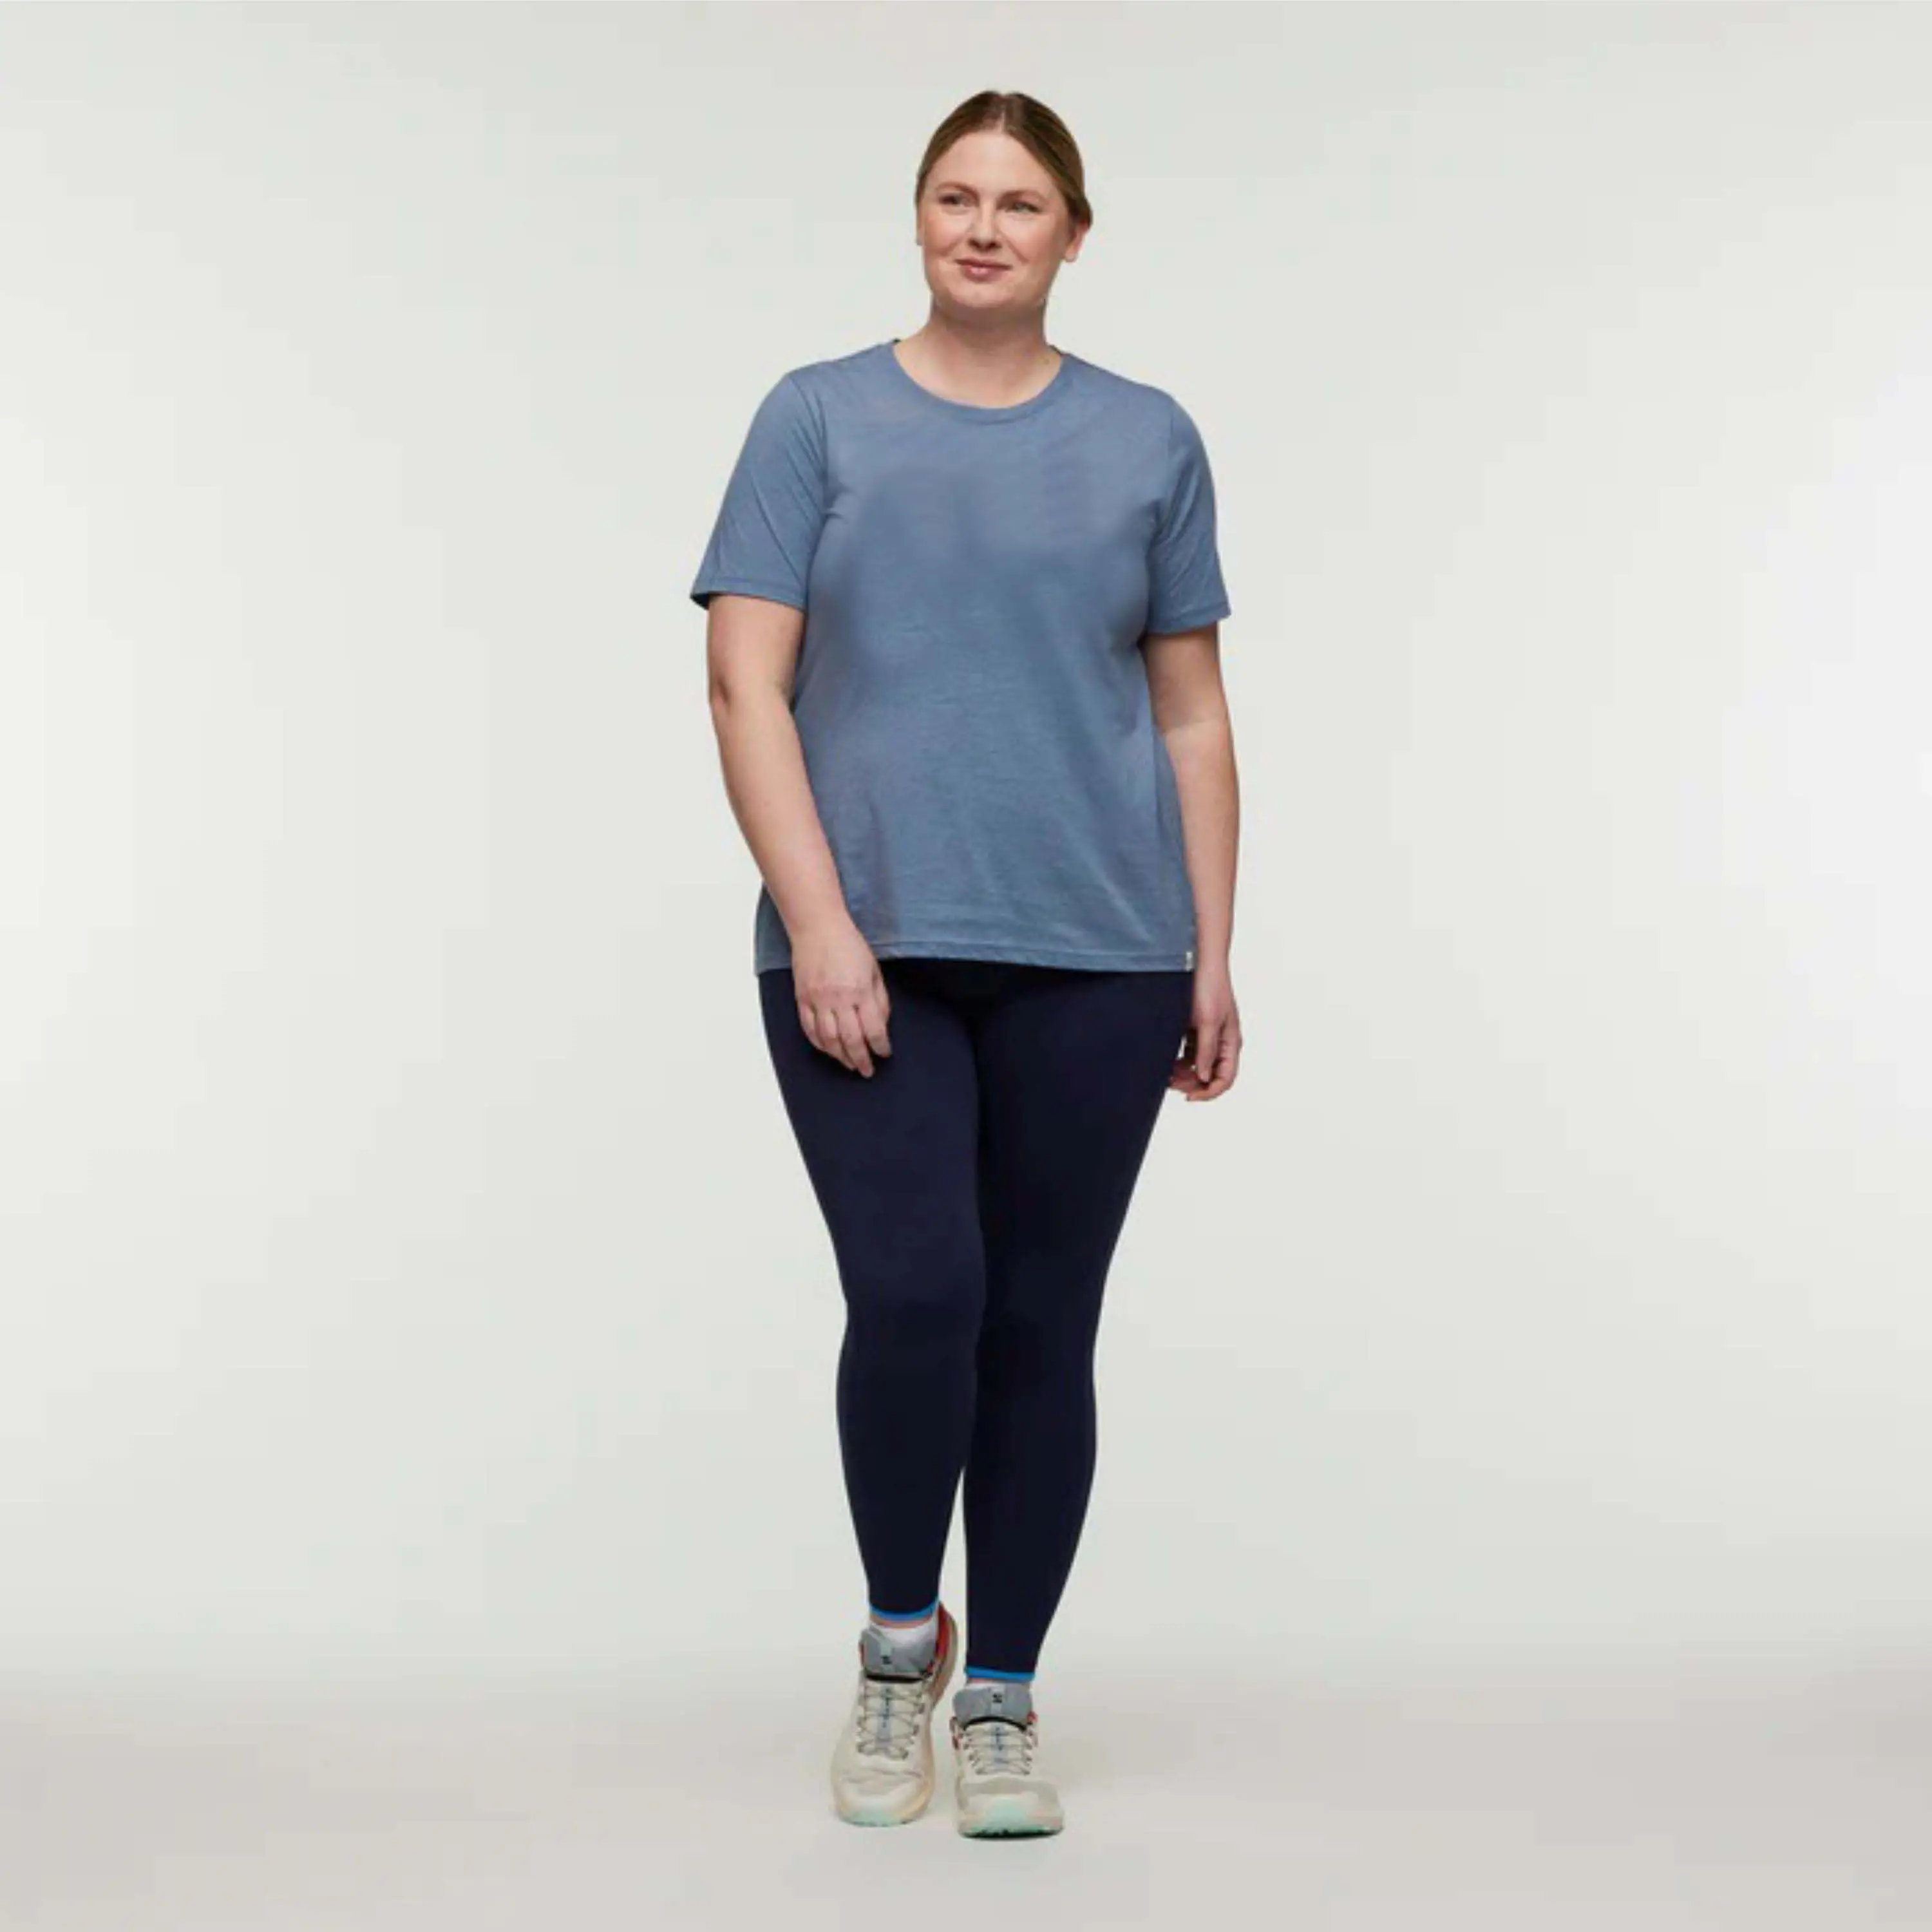 Plus Size Basic T-Shirt for Women - Comfort Stretch, Side Rushing for a Flattering Fit, Available in Extended Sizes